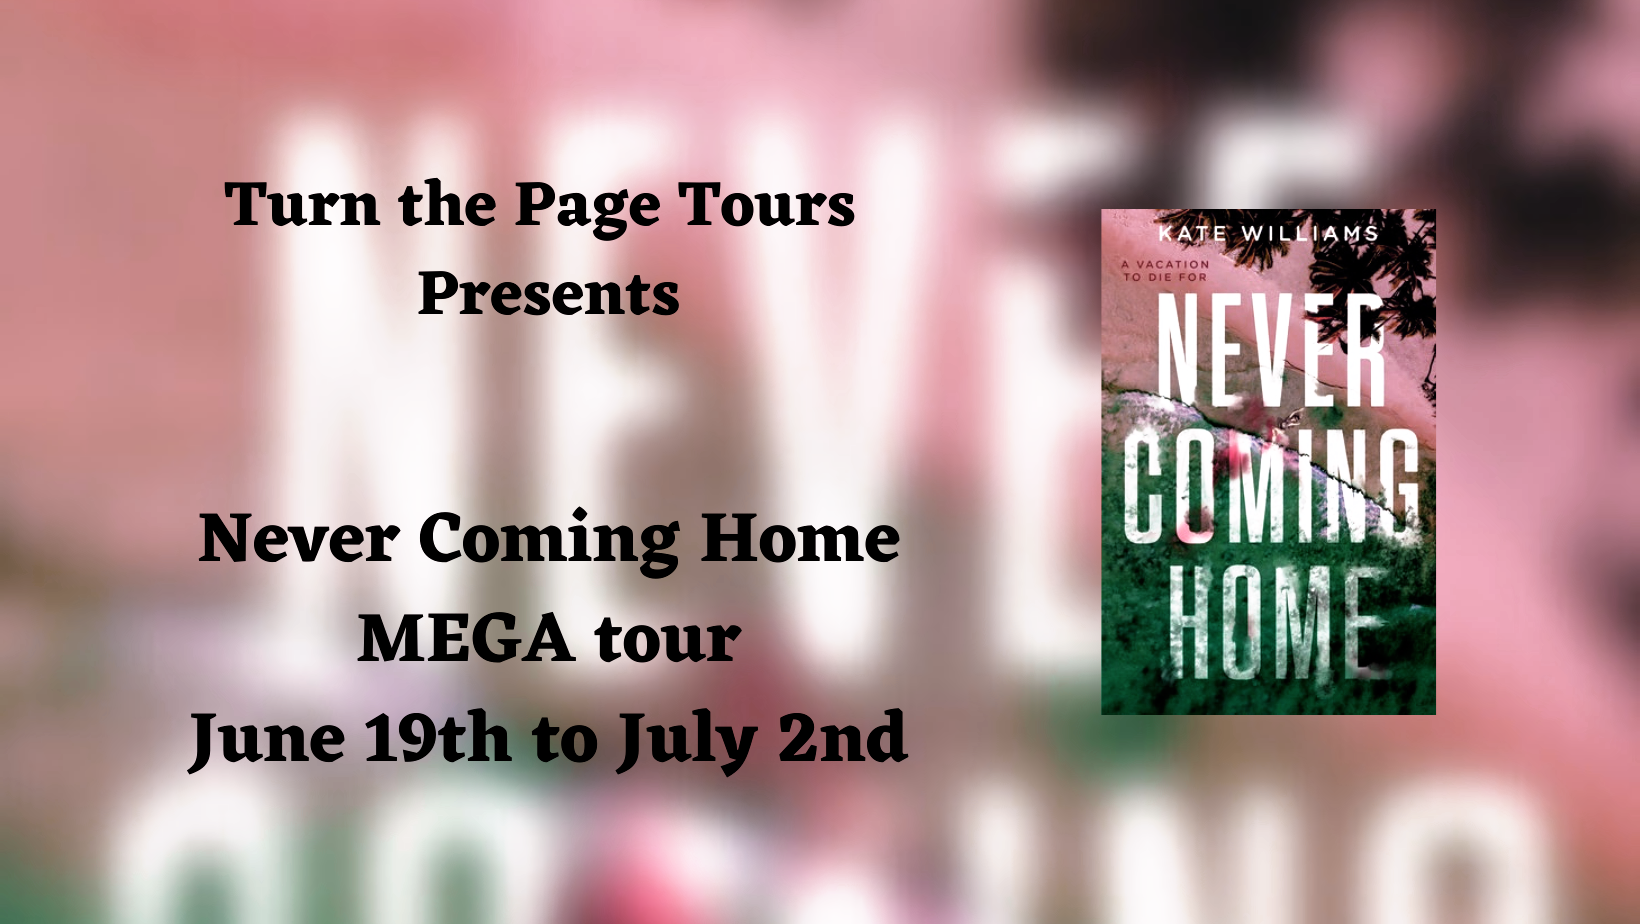 Blog Tour: Never Coming Home by Kate Williams (Review + Booktok + Bookstagram!)